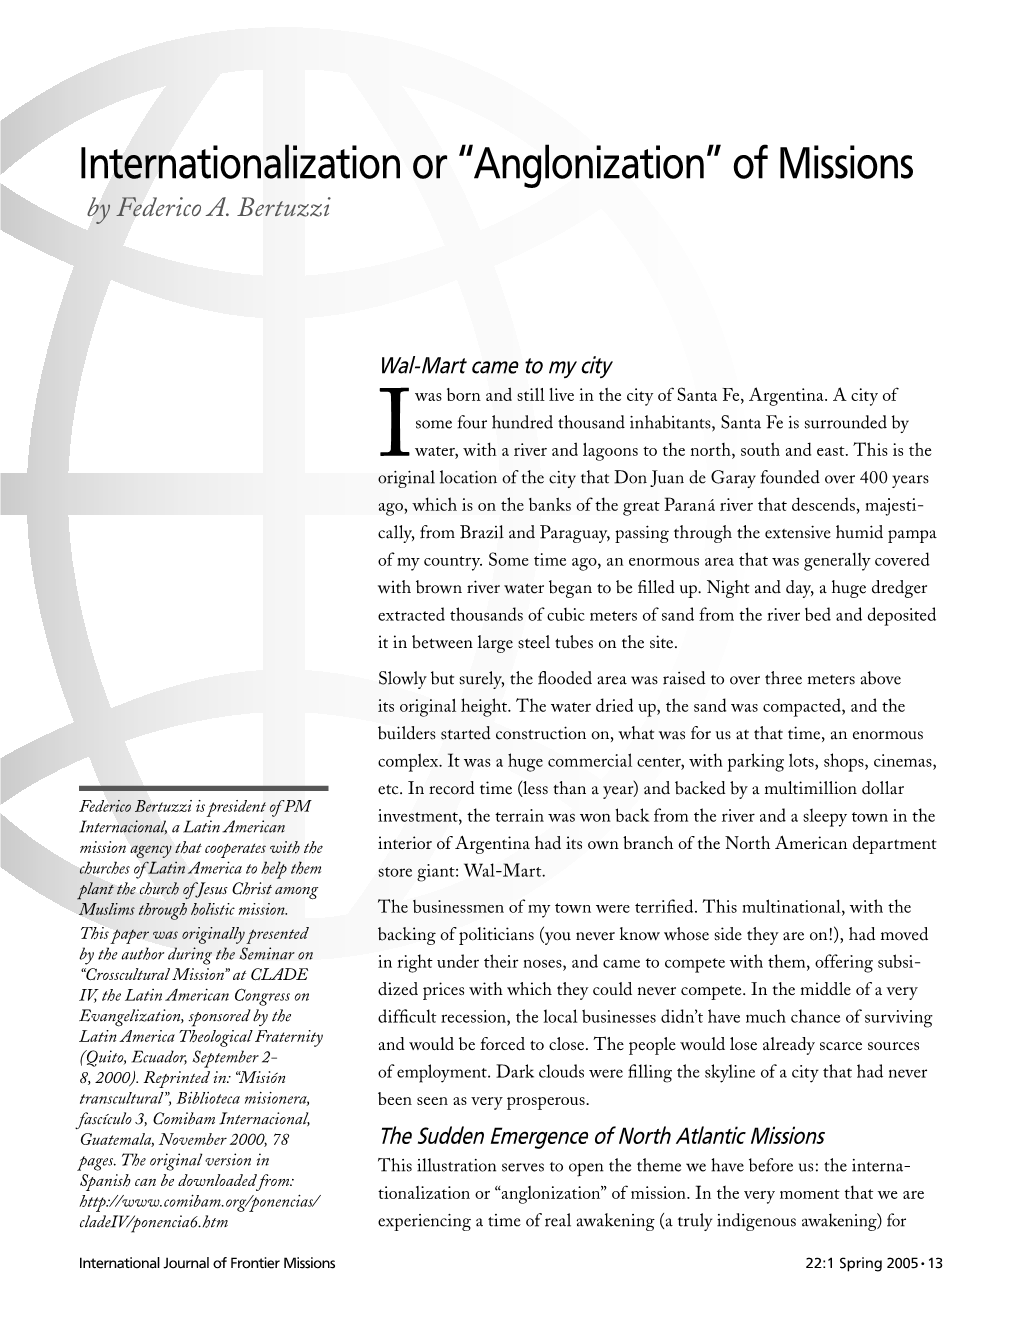 Internationalization Or “Anglonization” of Missions by Federico A